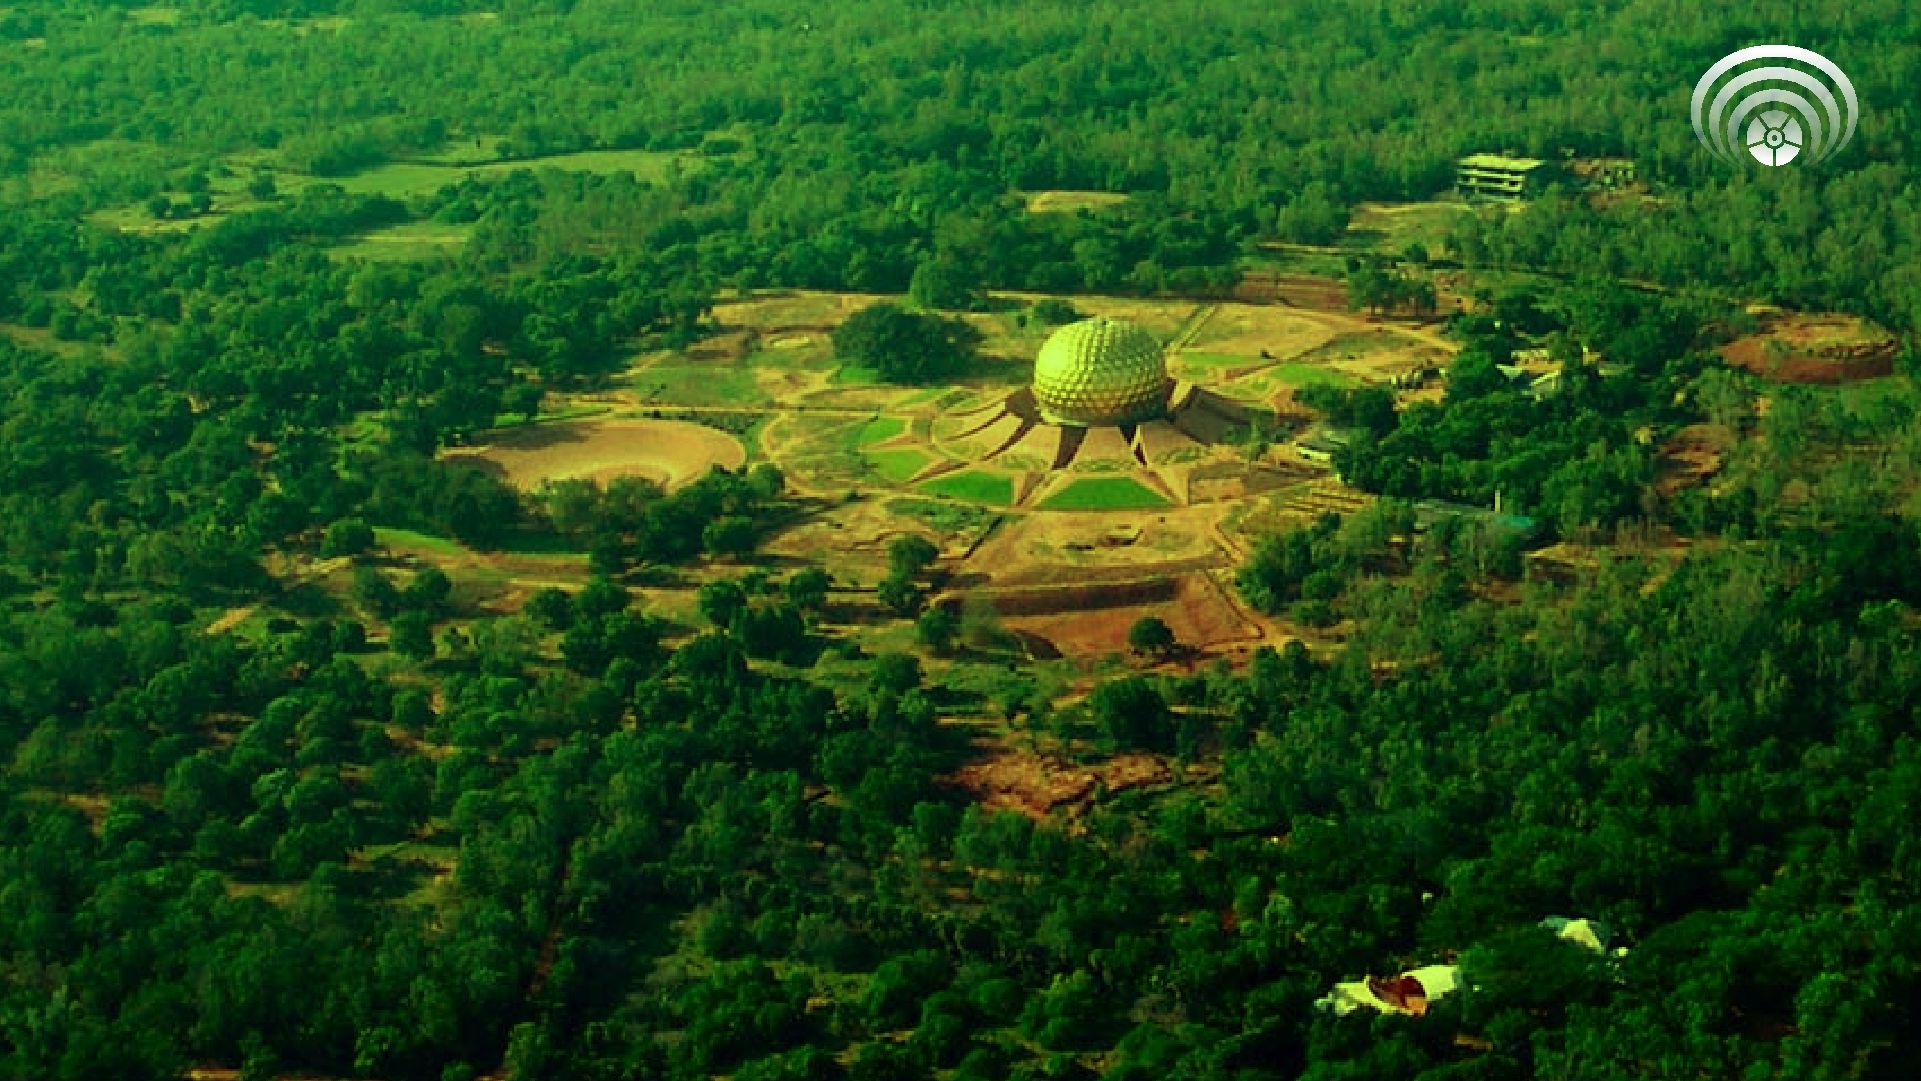 Guardians of Earth and Water: Auroville's Environmental Initiatives